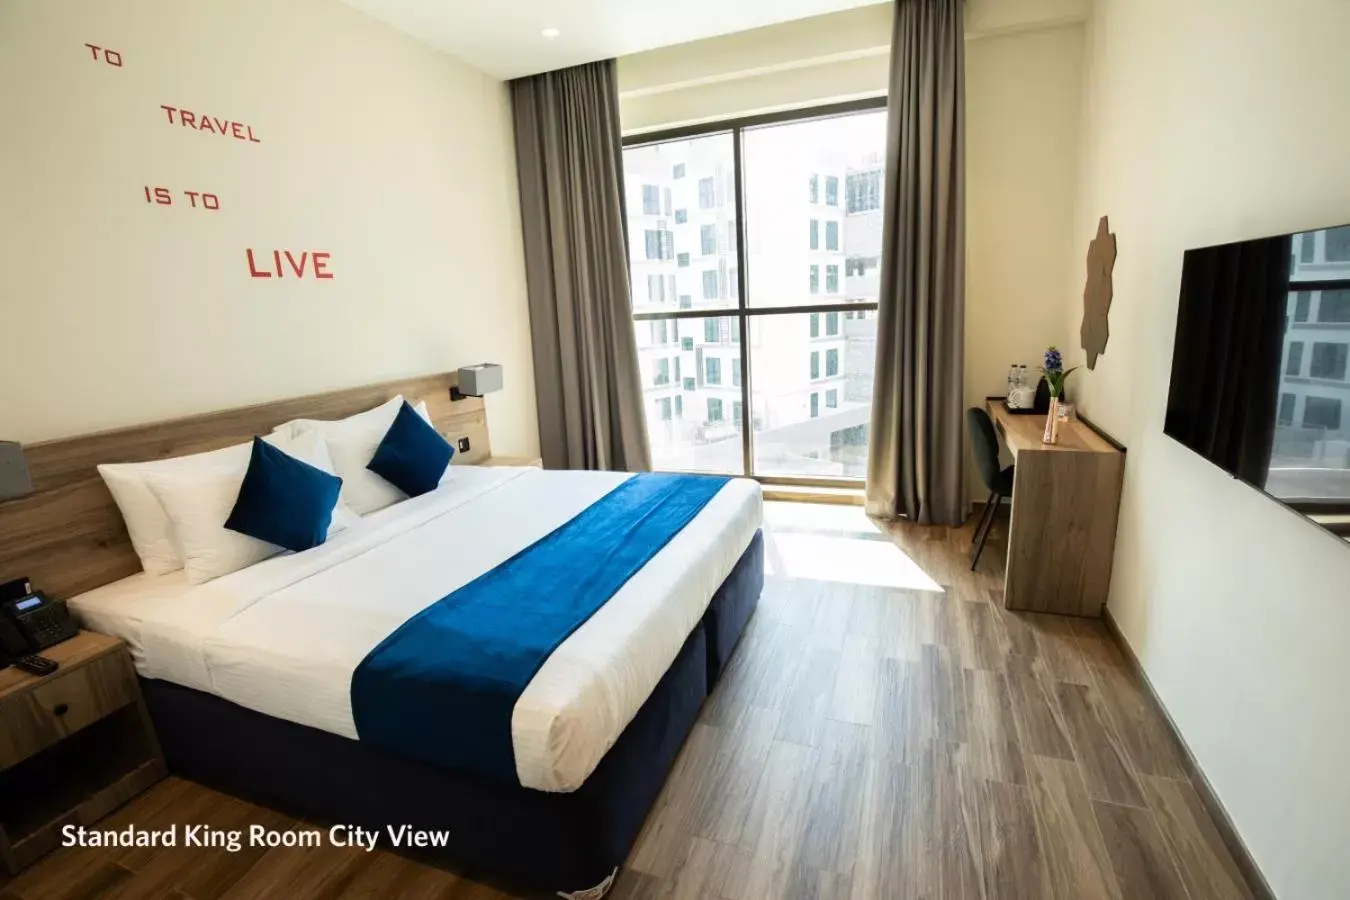 Standard King Room City View in Grand Kingsgate Waterfront Hotel by Millennium